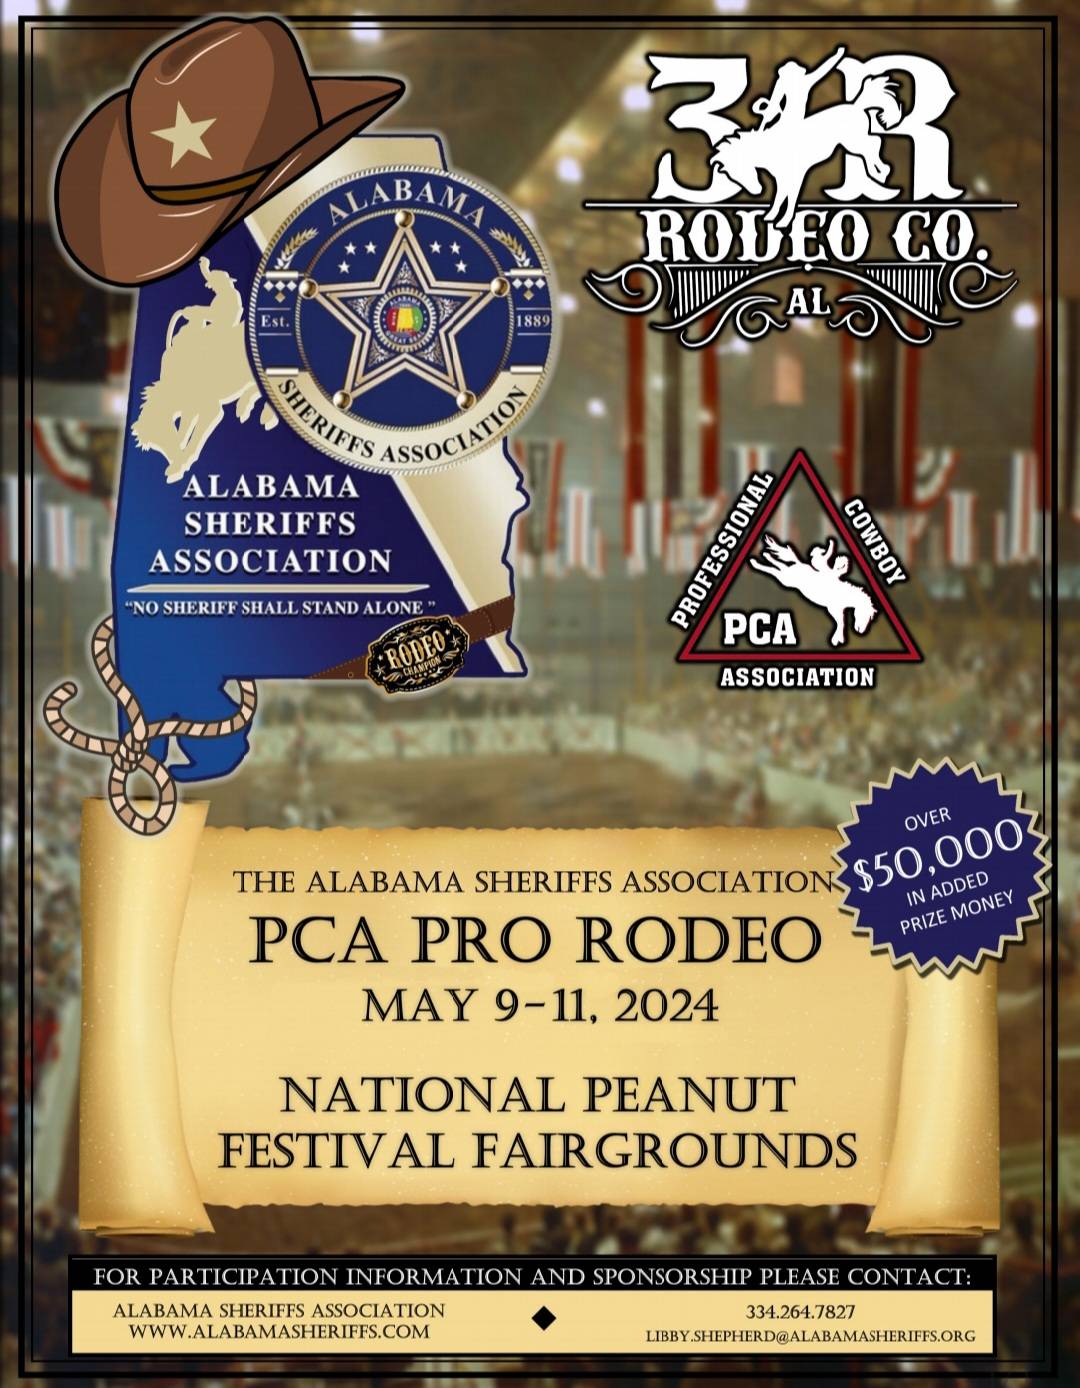 PCA Pro Rodeo by 3R Rodeo - National Peanut Festival Fairgrounds Dothan AL - May 9-11 2024